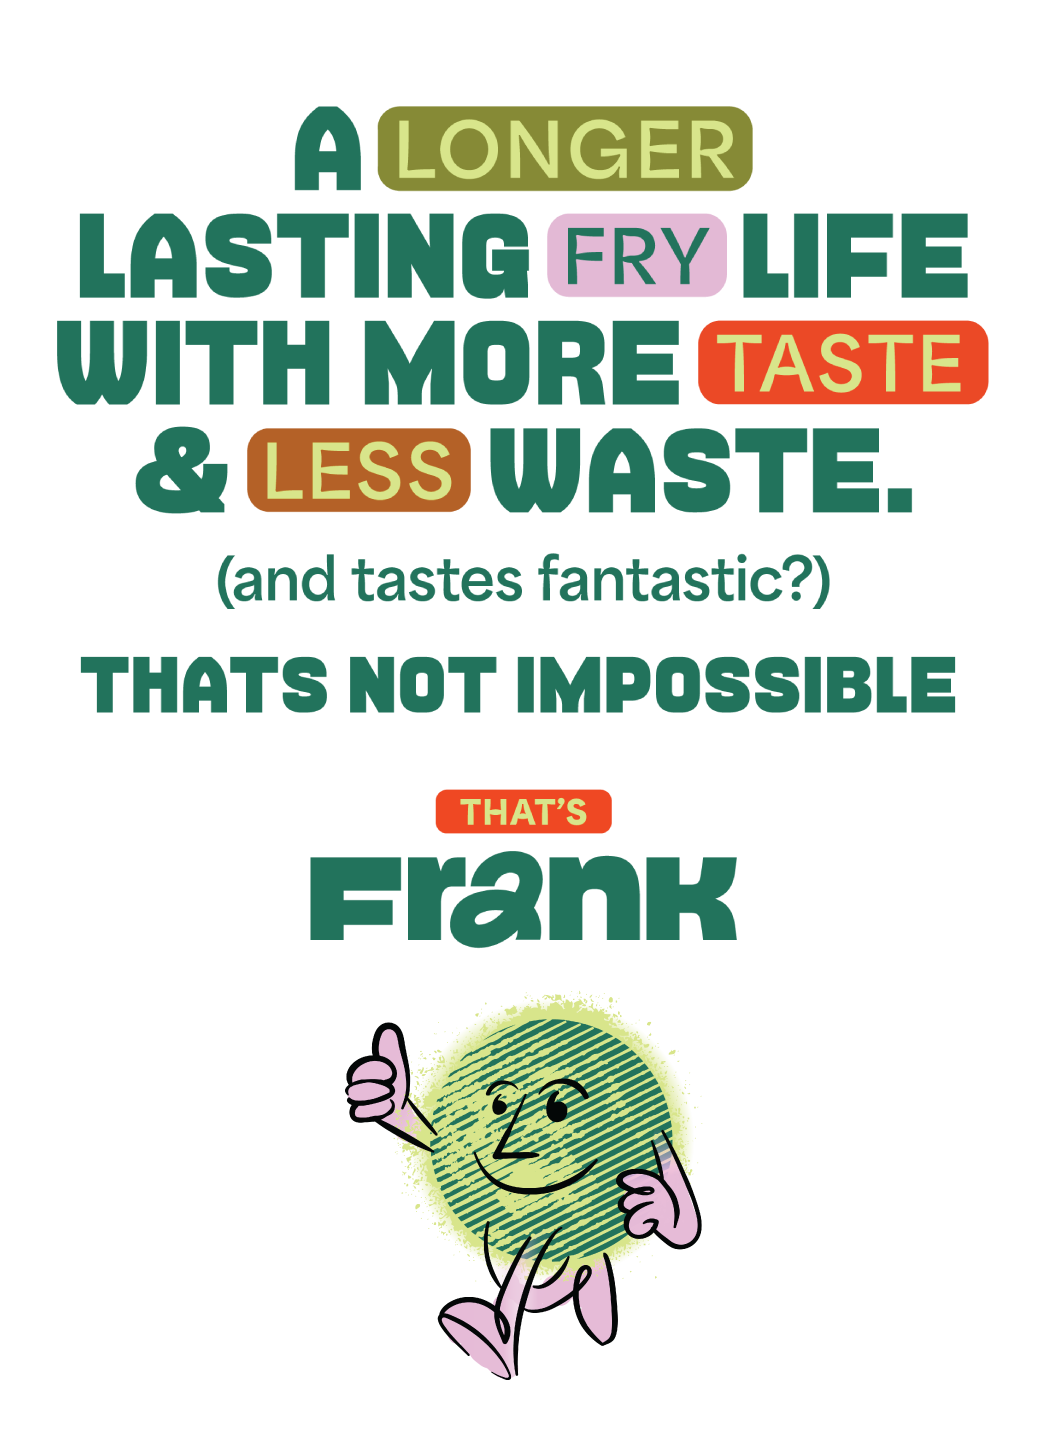 A longer lasting fry life &amp; less waste. (and tastes fantaastic?) That's impossible. That's Frank